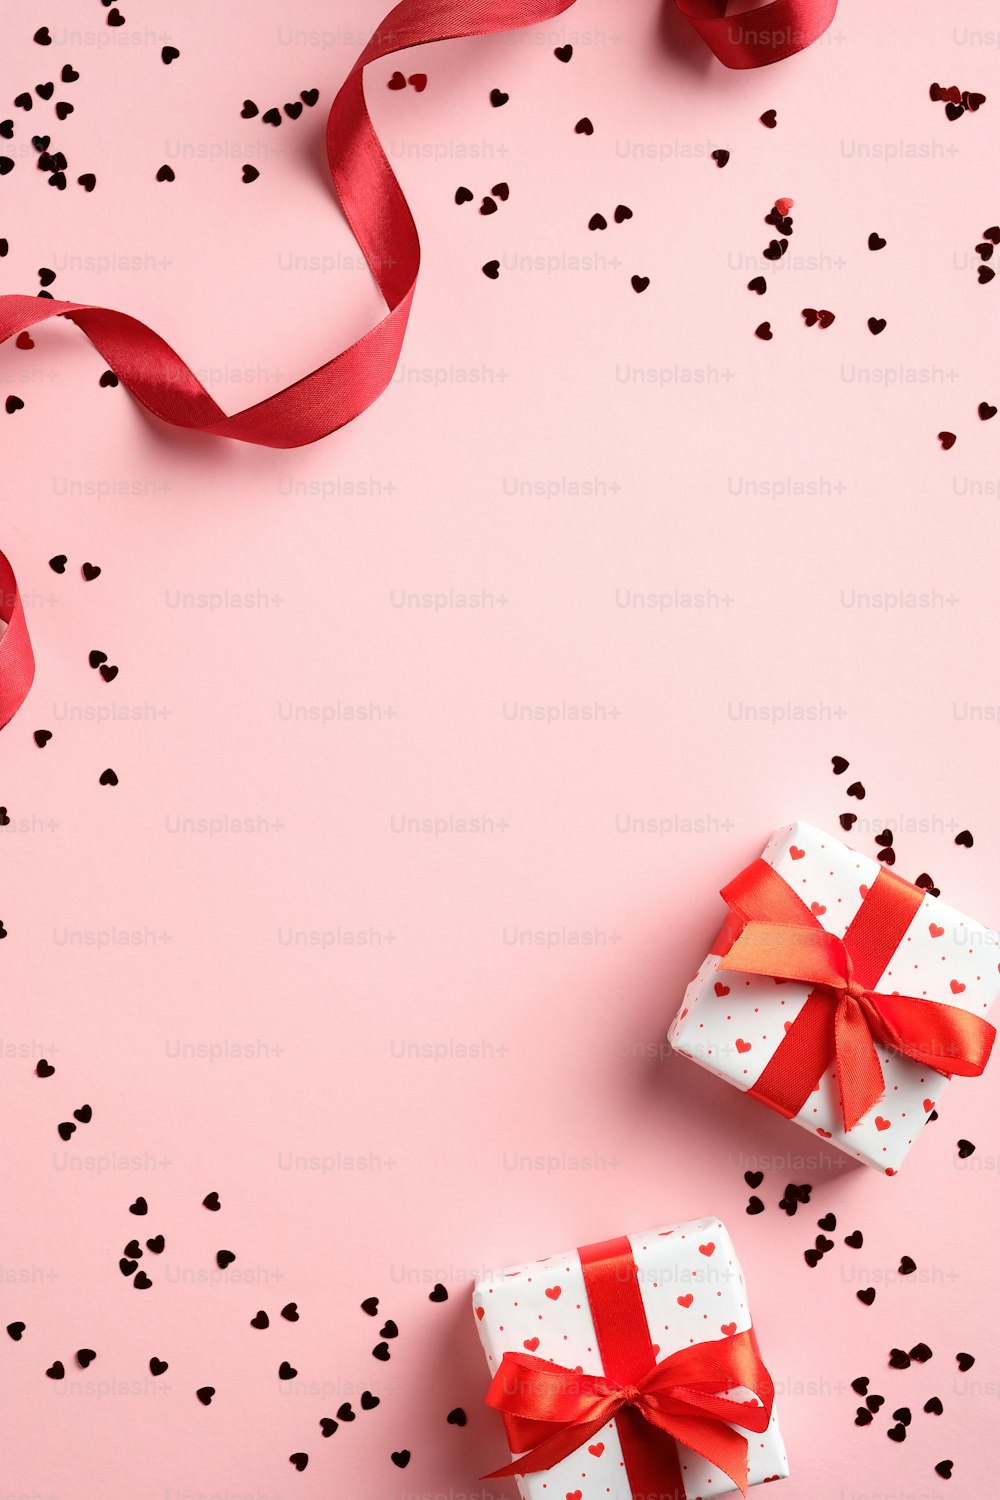 Valentines day card template with gifts, red ribbon, confetti on pink background. Flat lay, top view, copy space.